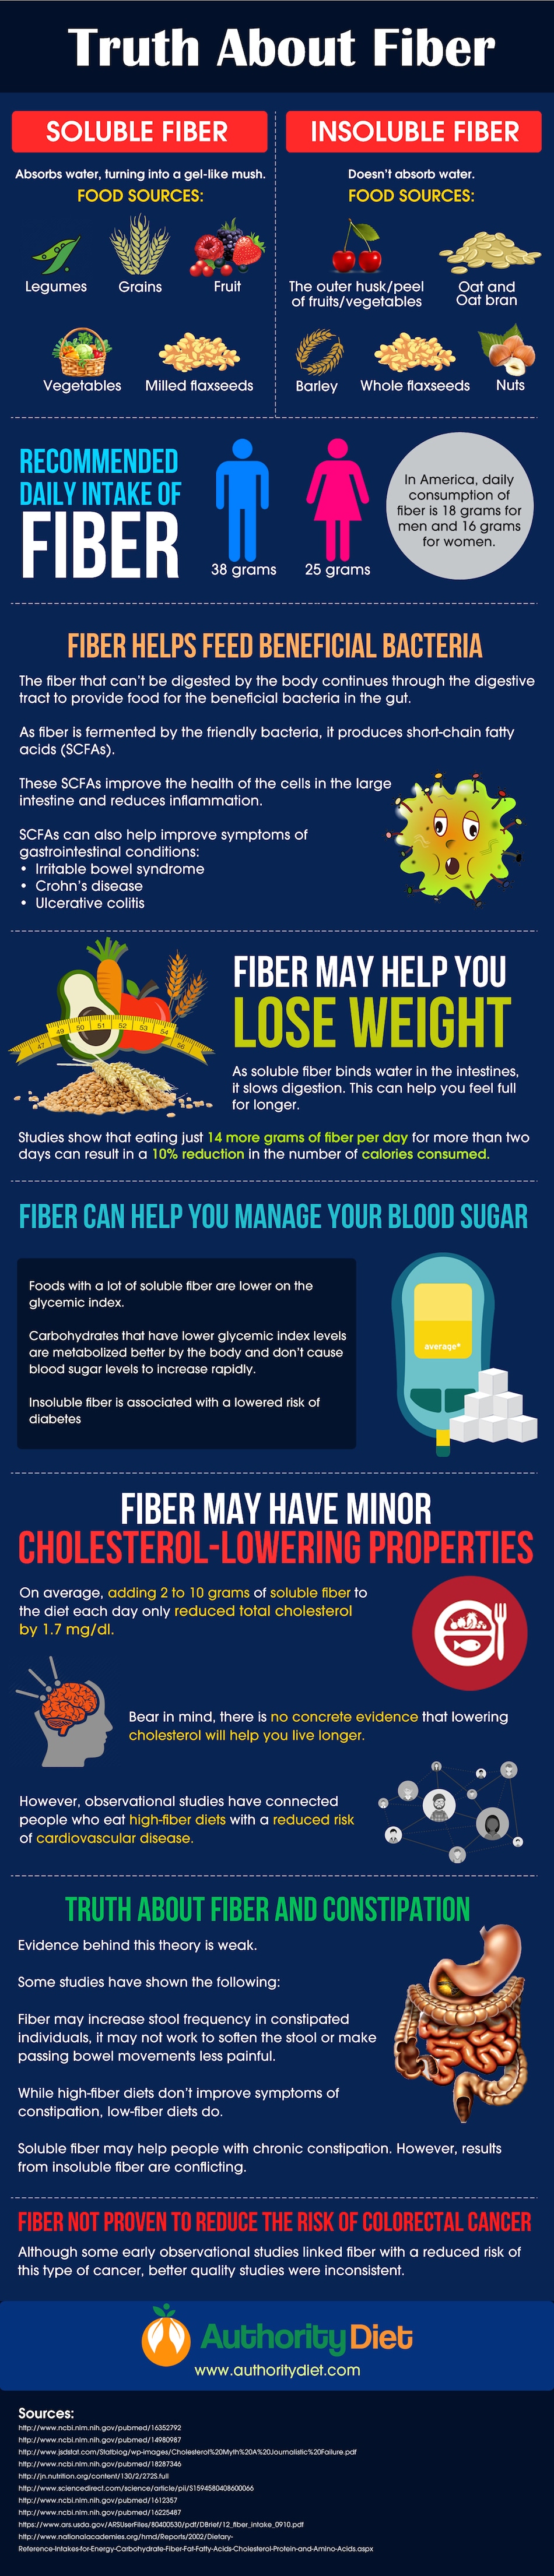 Is Fiber Really Good for You?